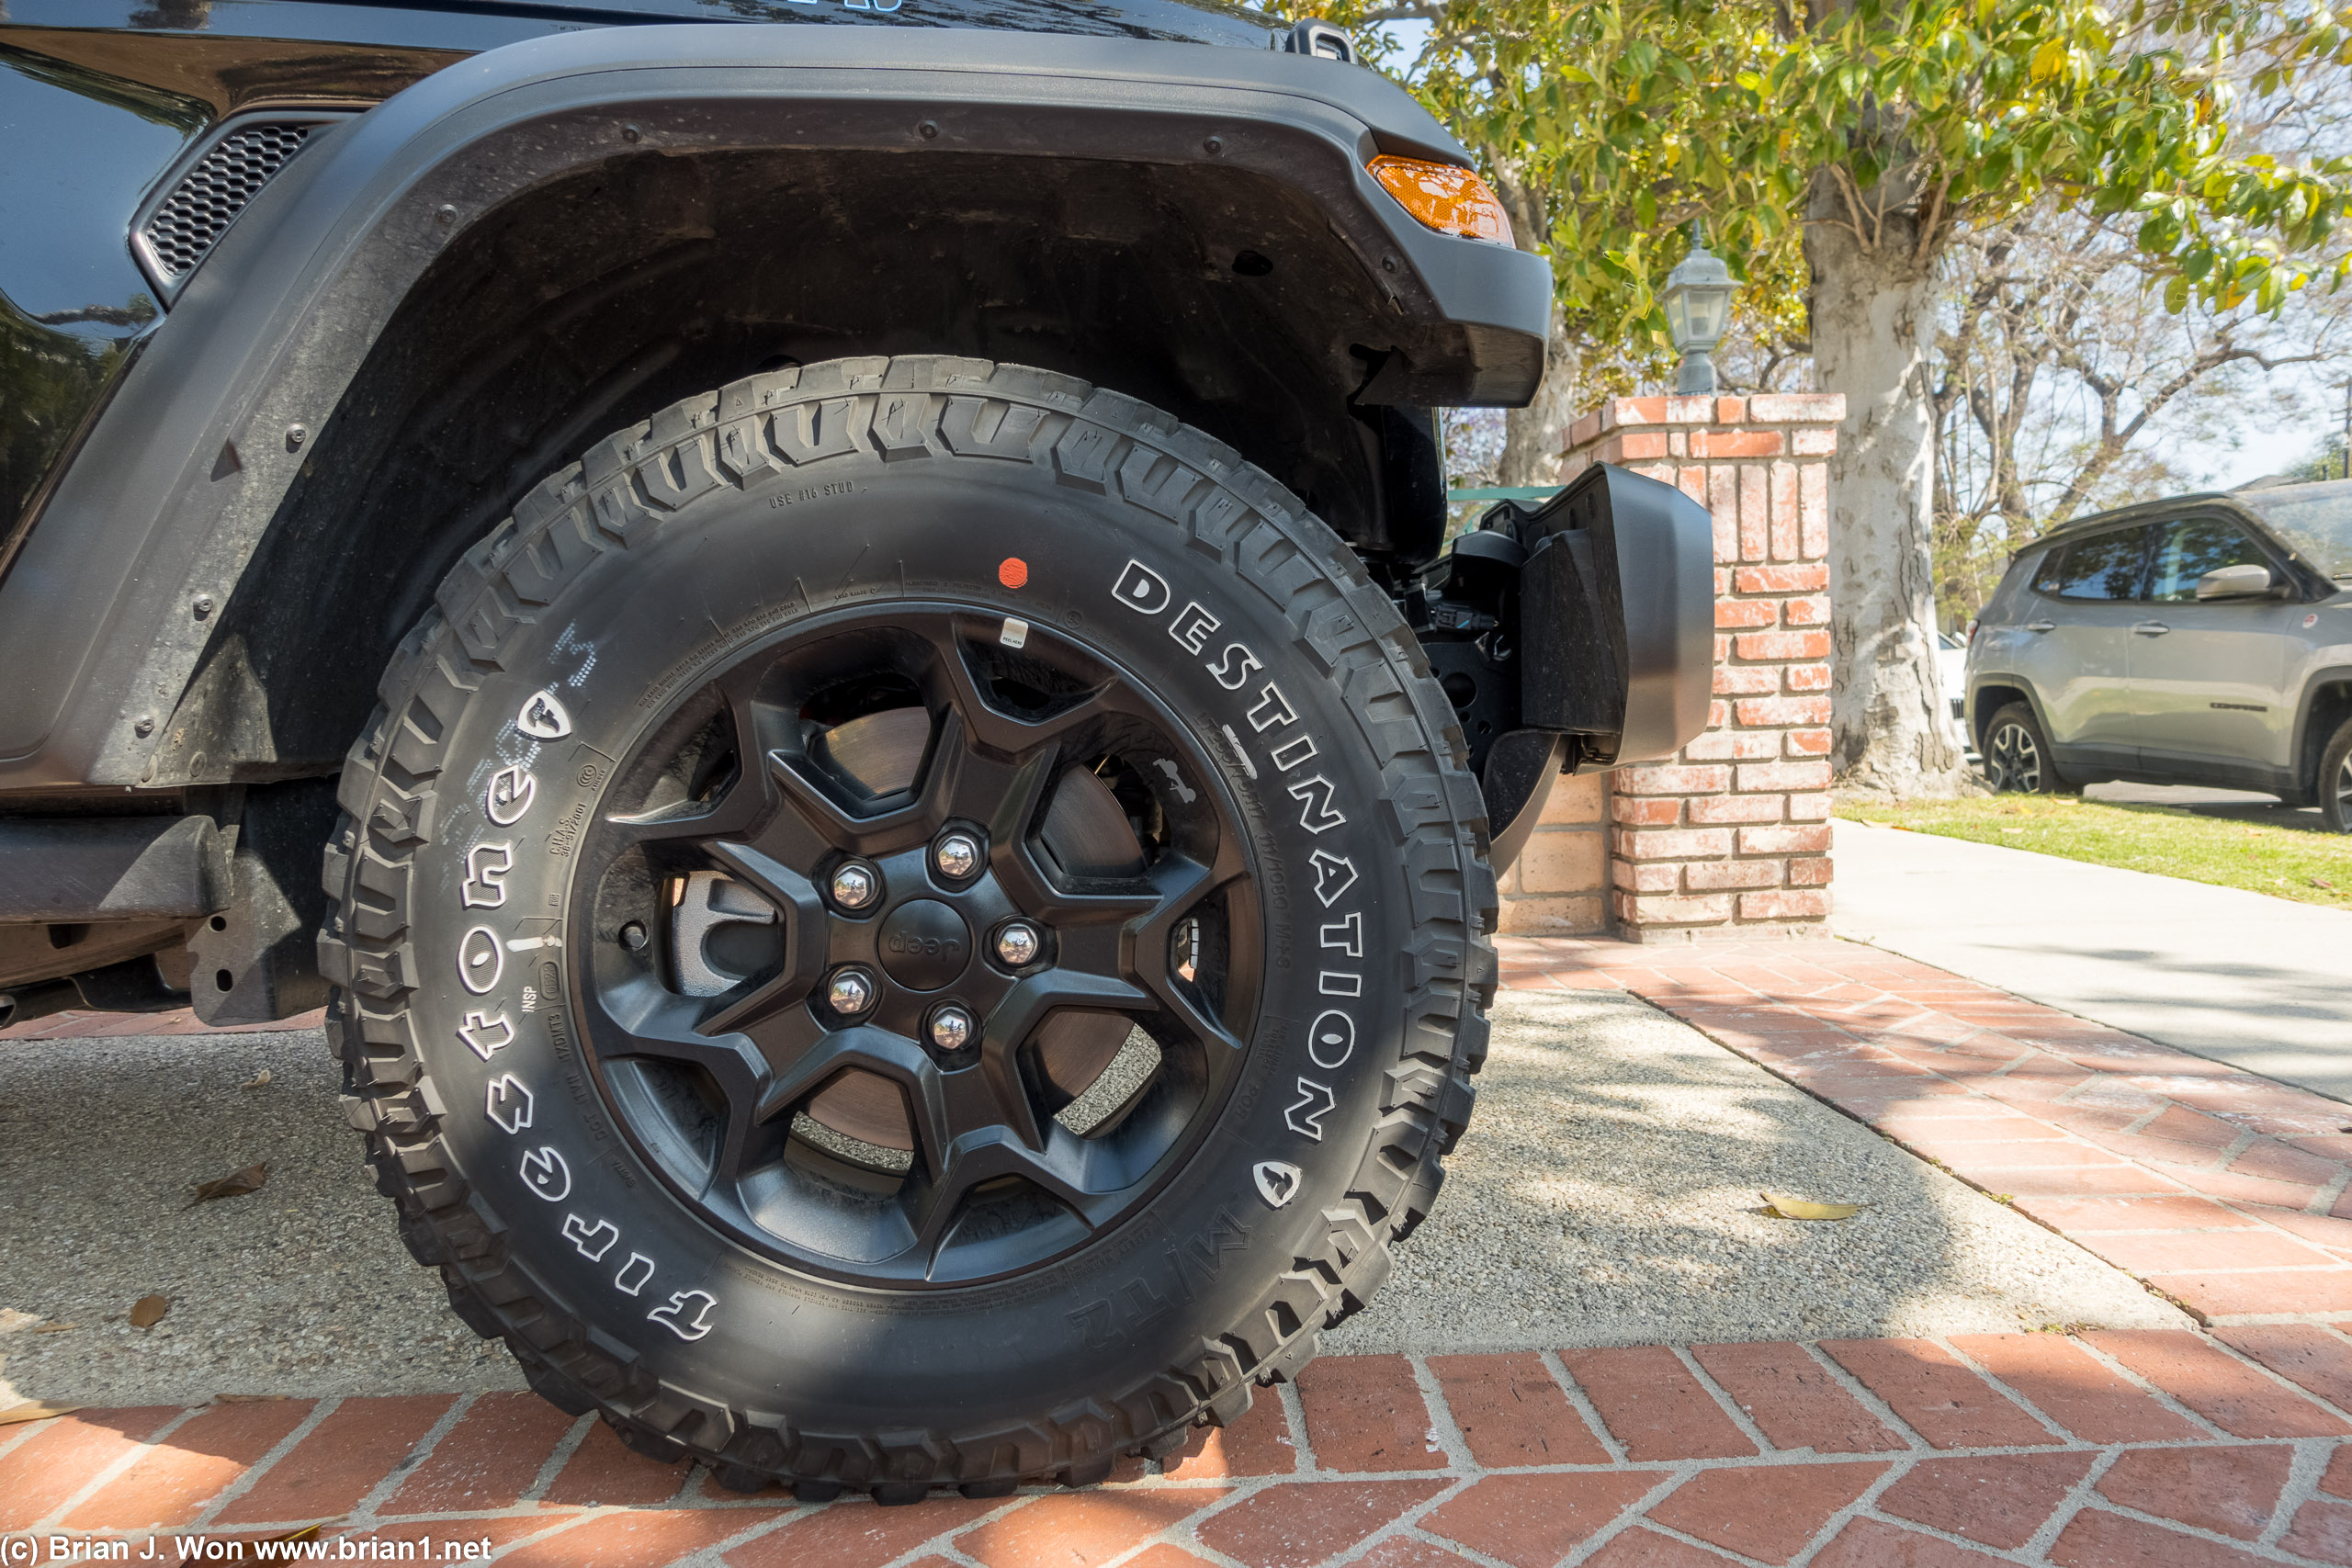 Pretty off-road-style tires from the factory.